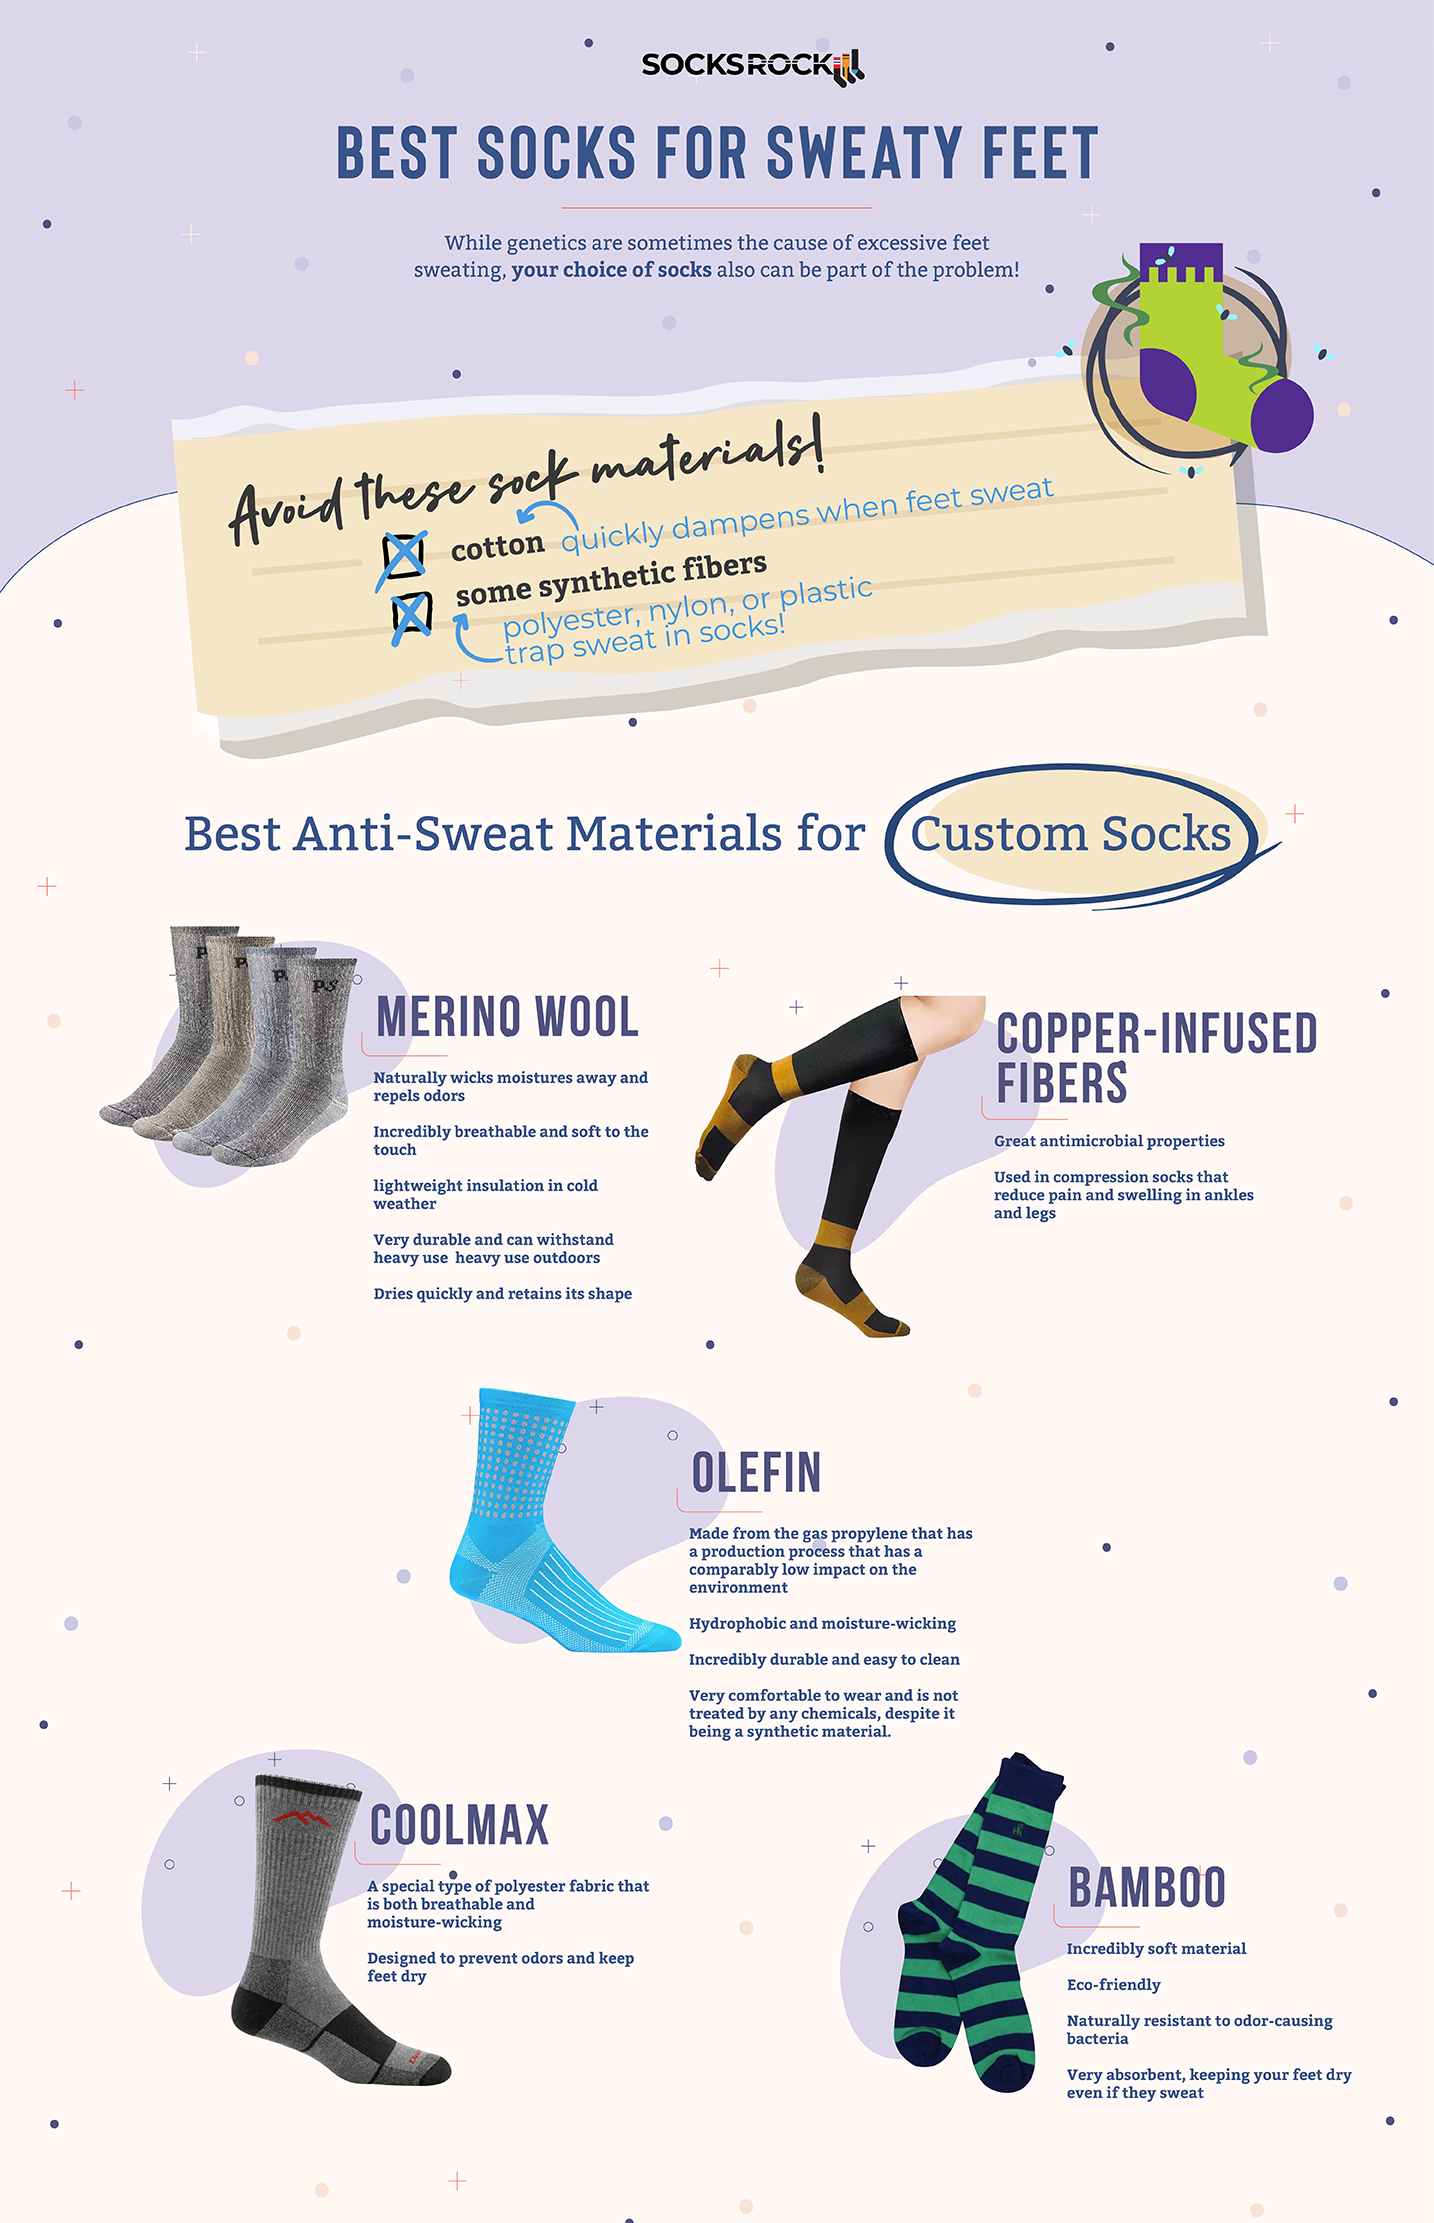 What is the best sock material?